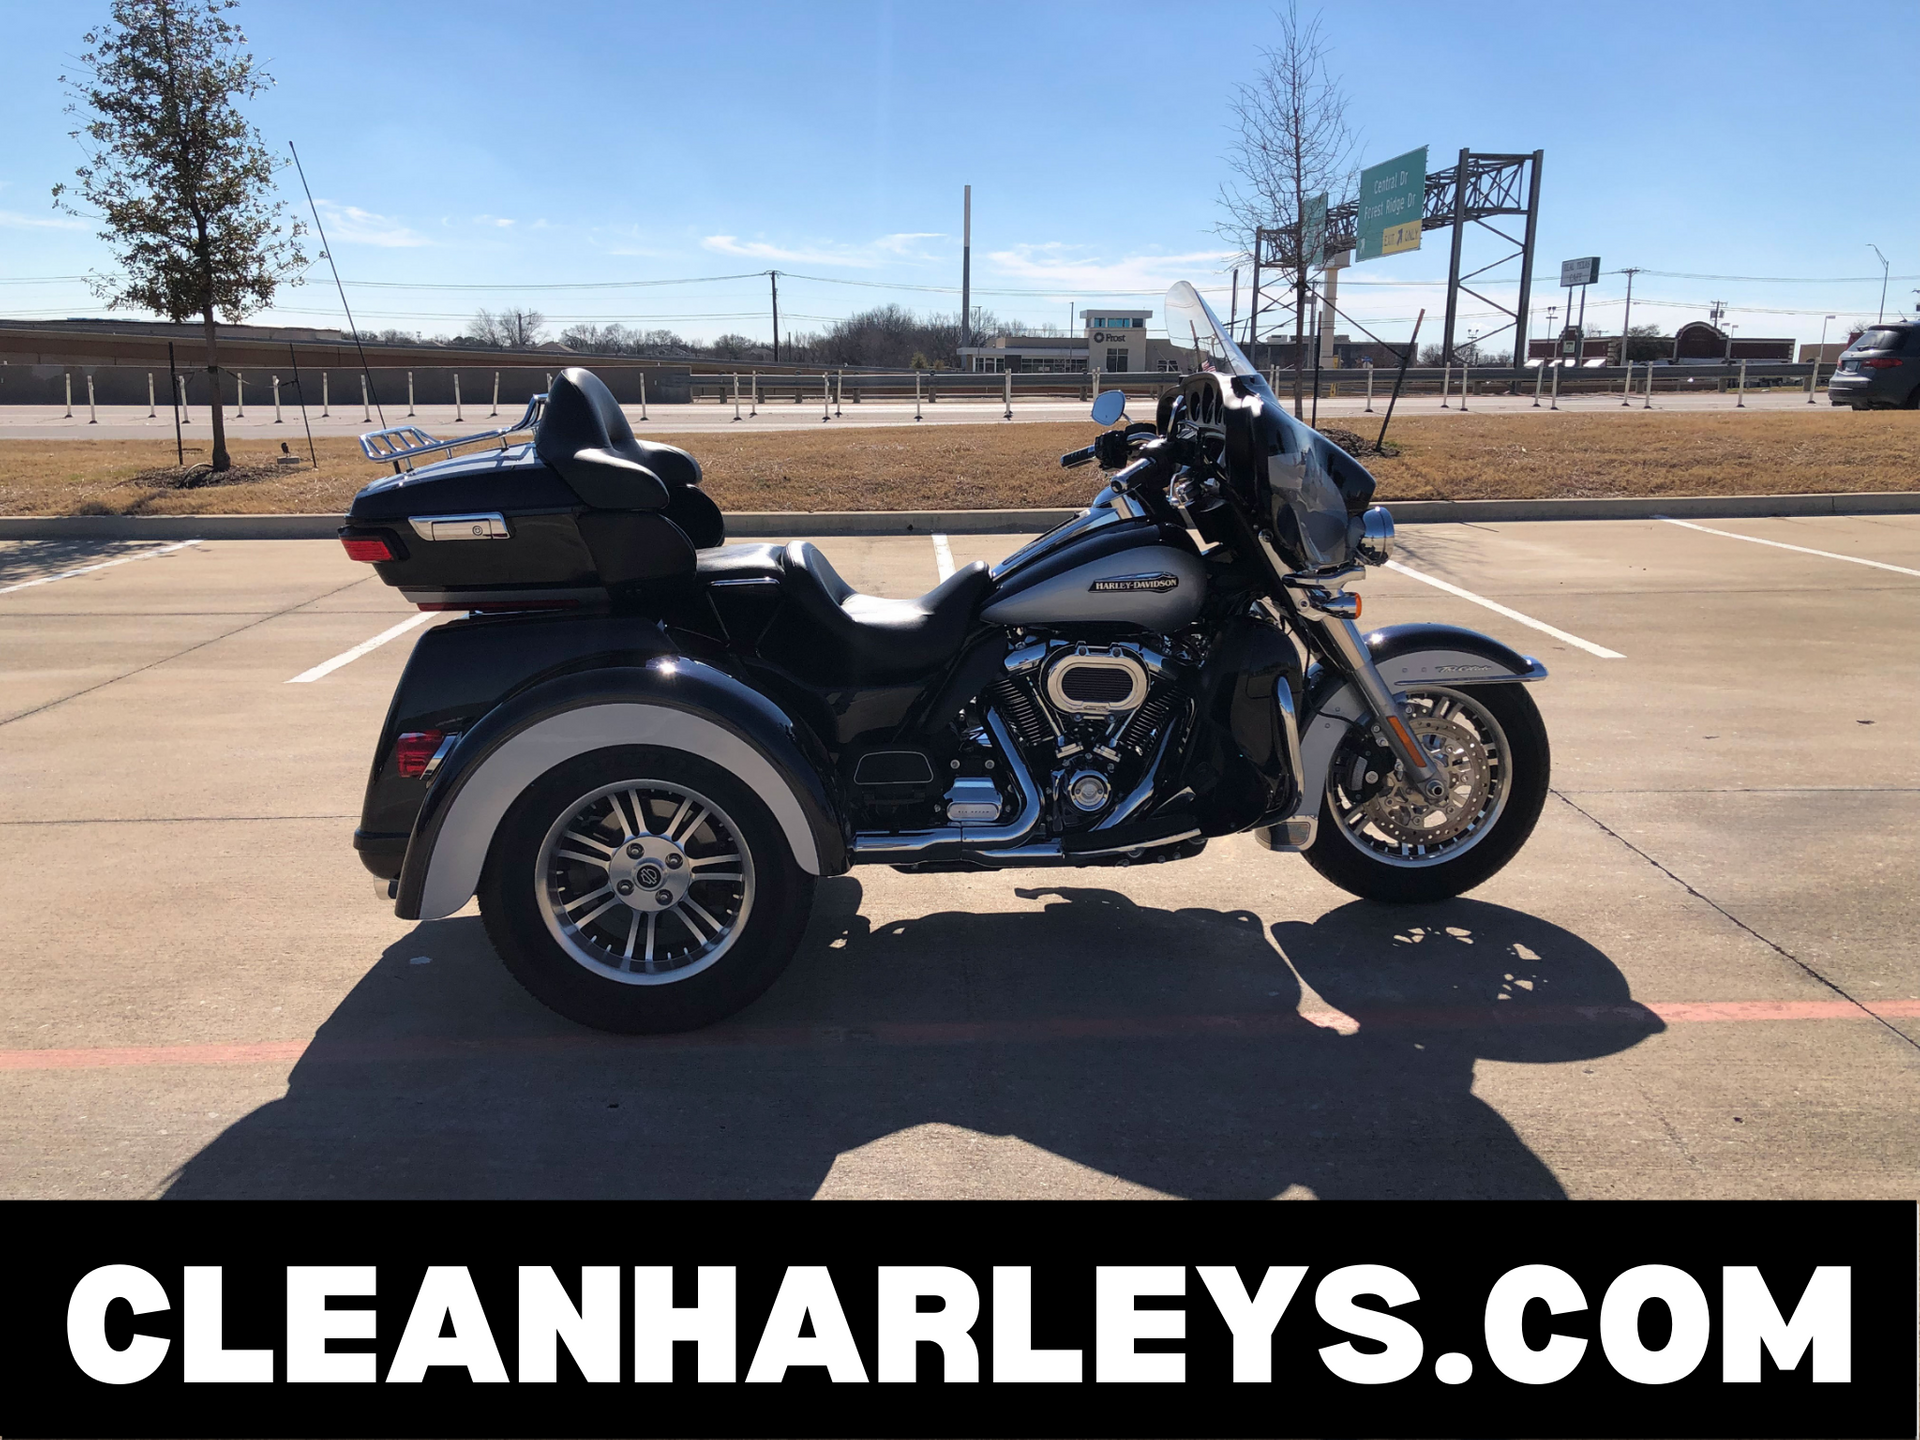 Pre-Owned Motorcycles For Sale | AMTC Bedford Texas